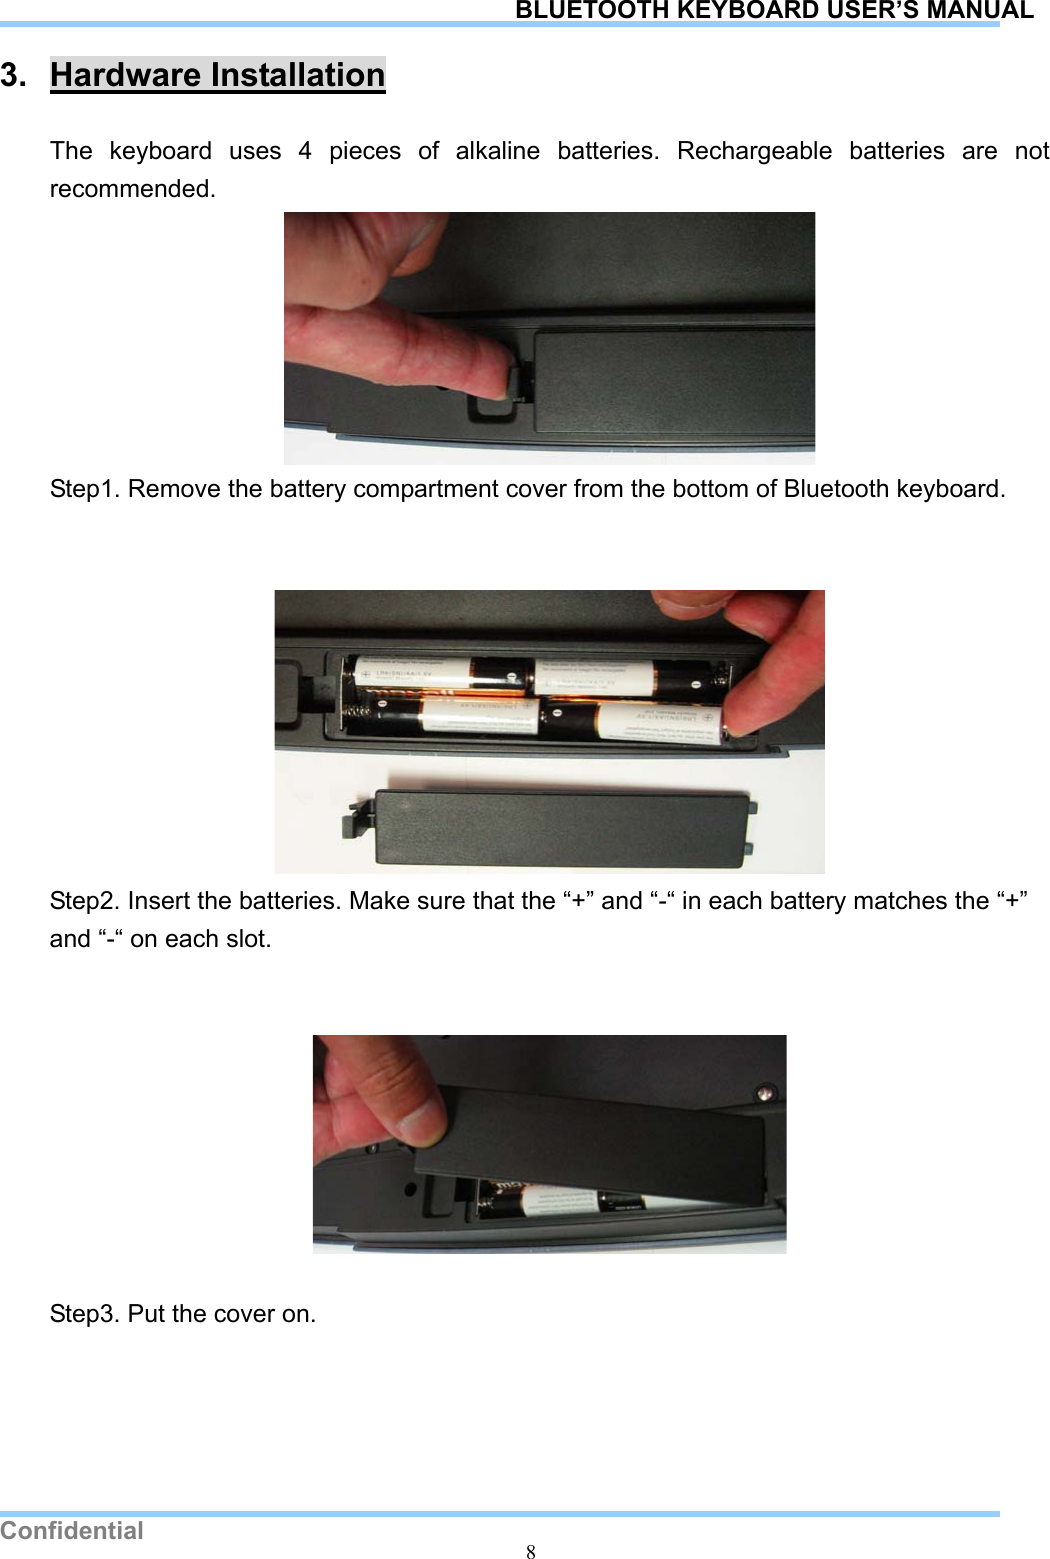   Confidential   8 BLUETOOTH KEYBOARD USER’S MANUAL3. Hardware Installation The keyboard uses 4 pieces of alkaline batteries. Rechargeable batteries are not recommended.   Step1. Remove the battery compartment cover from the bottom of Bluetooth keyboard.    Step2. Insert the batteries. Make sure that the “+” and “-“ in each battery matches the “+” and “-“ on each slot.     Step3. Put the cover on.      